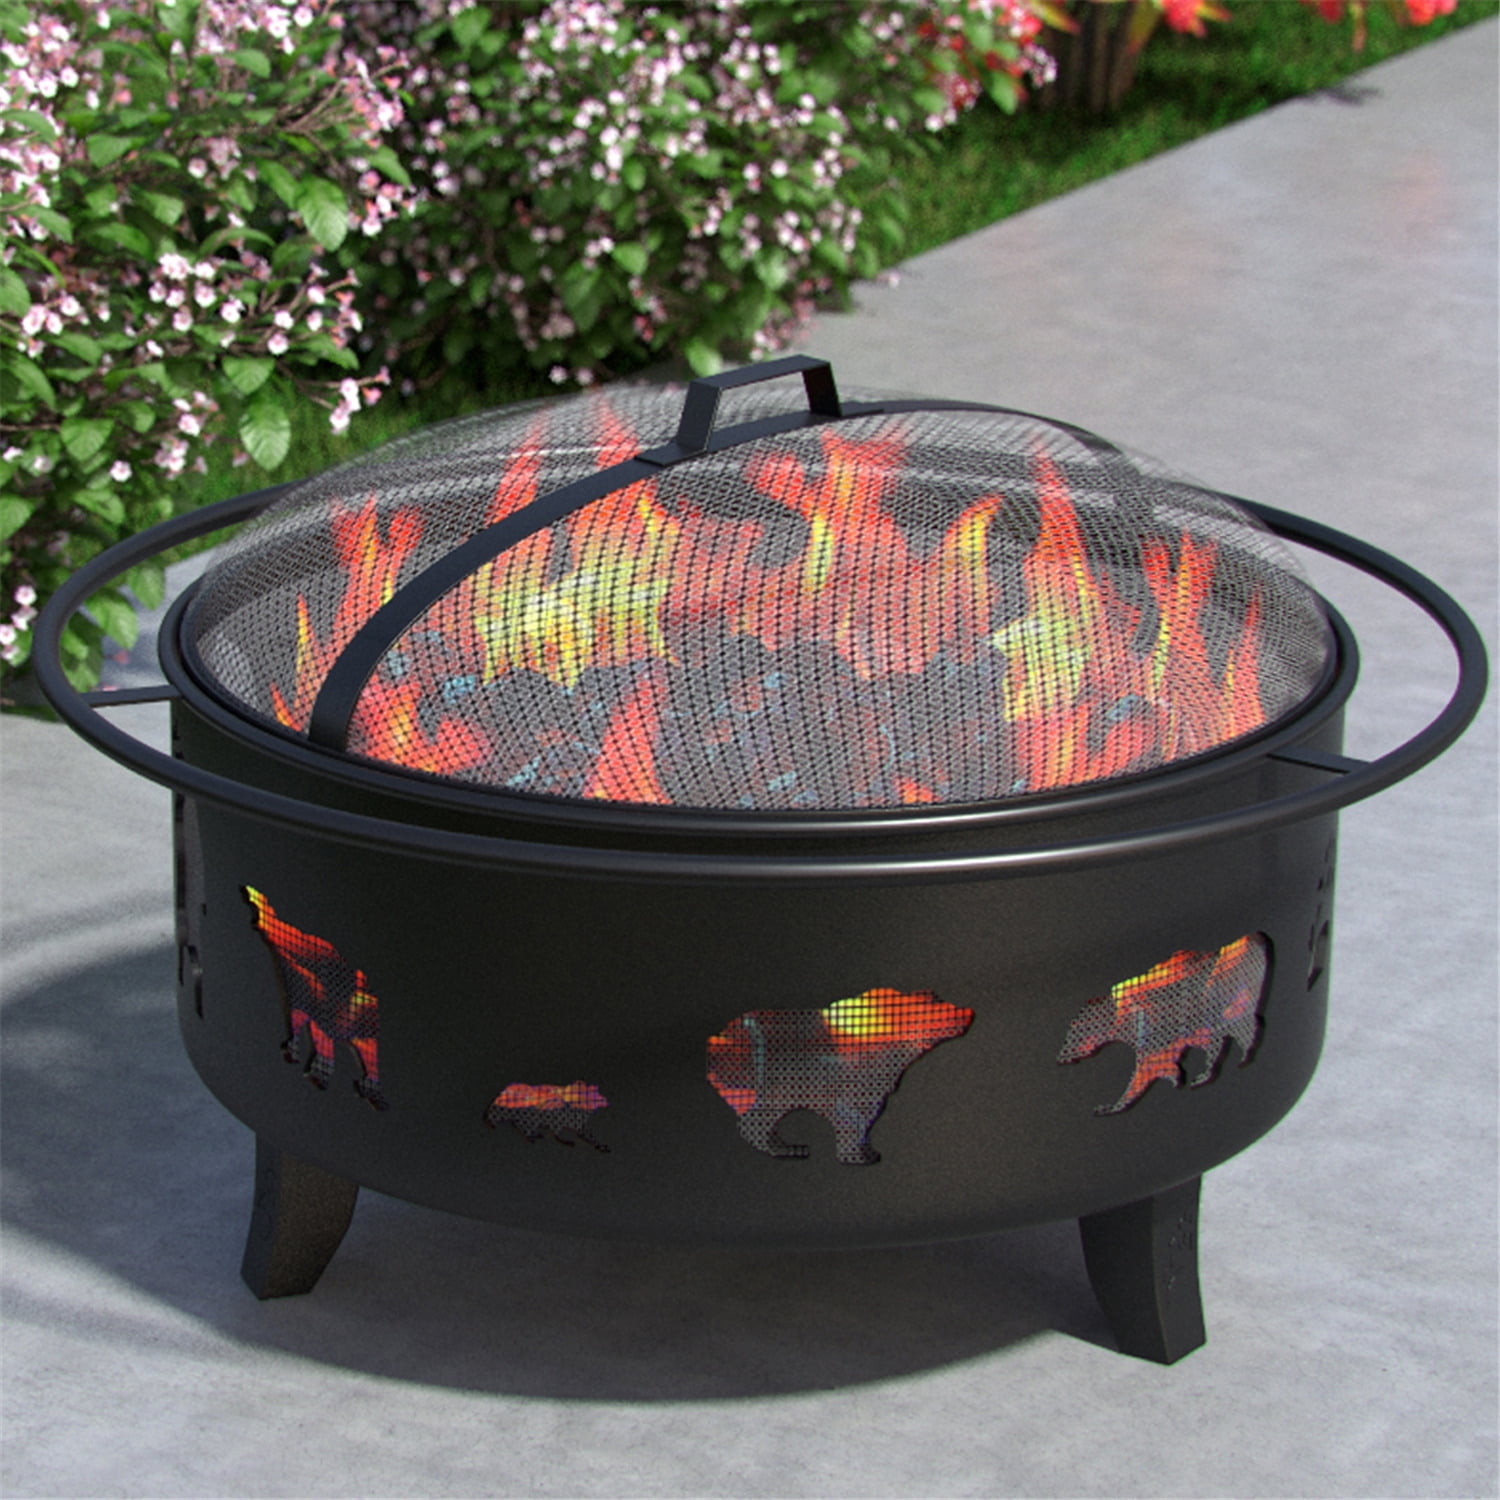 Regal Flame Wild Bear 35 Portable Outdoor Fireplace Fire Pit Ring for Backyard Patio Fire, RV, Patio Heater, Stove, Camping, Bo